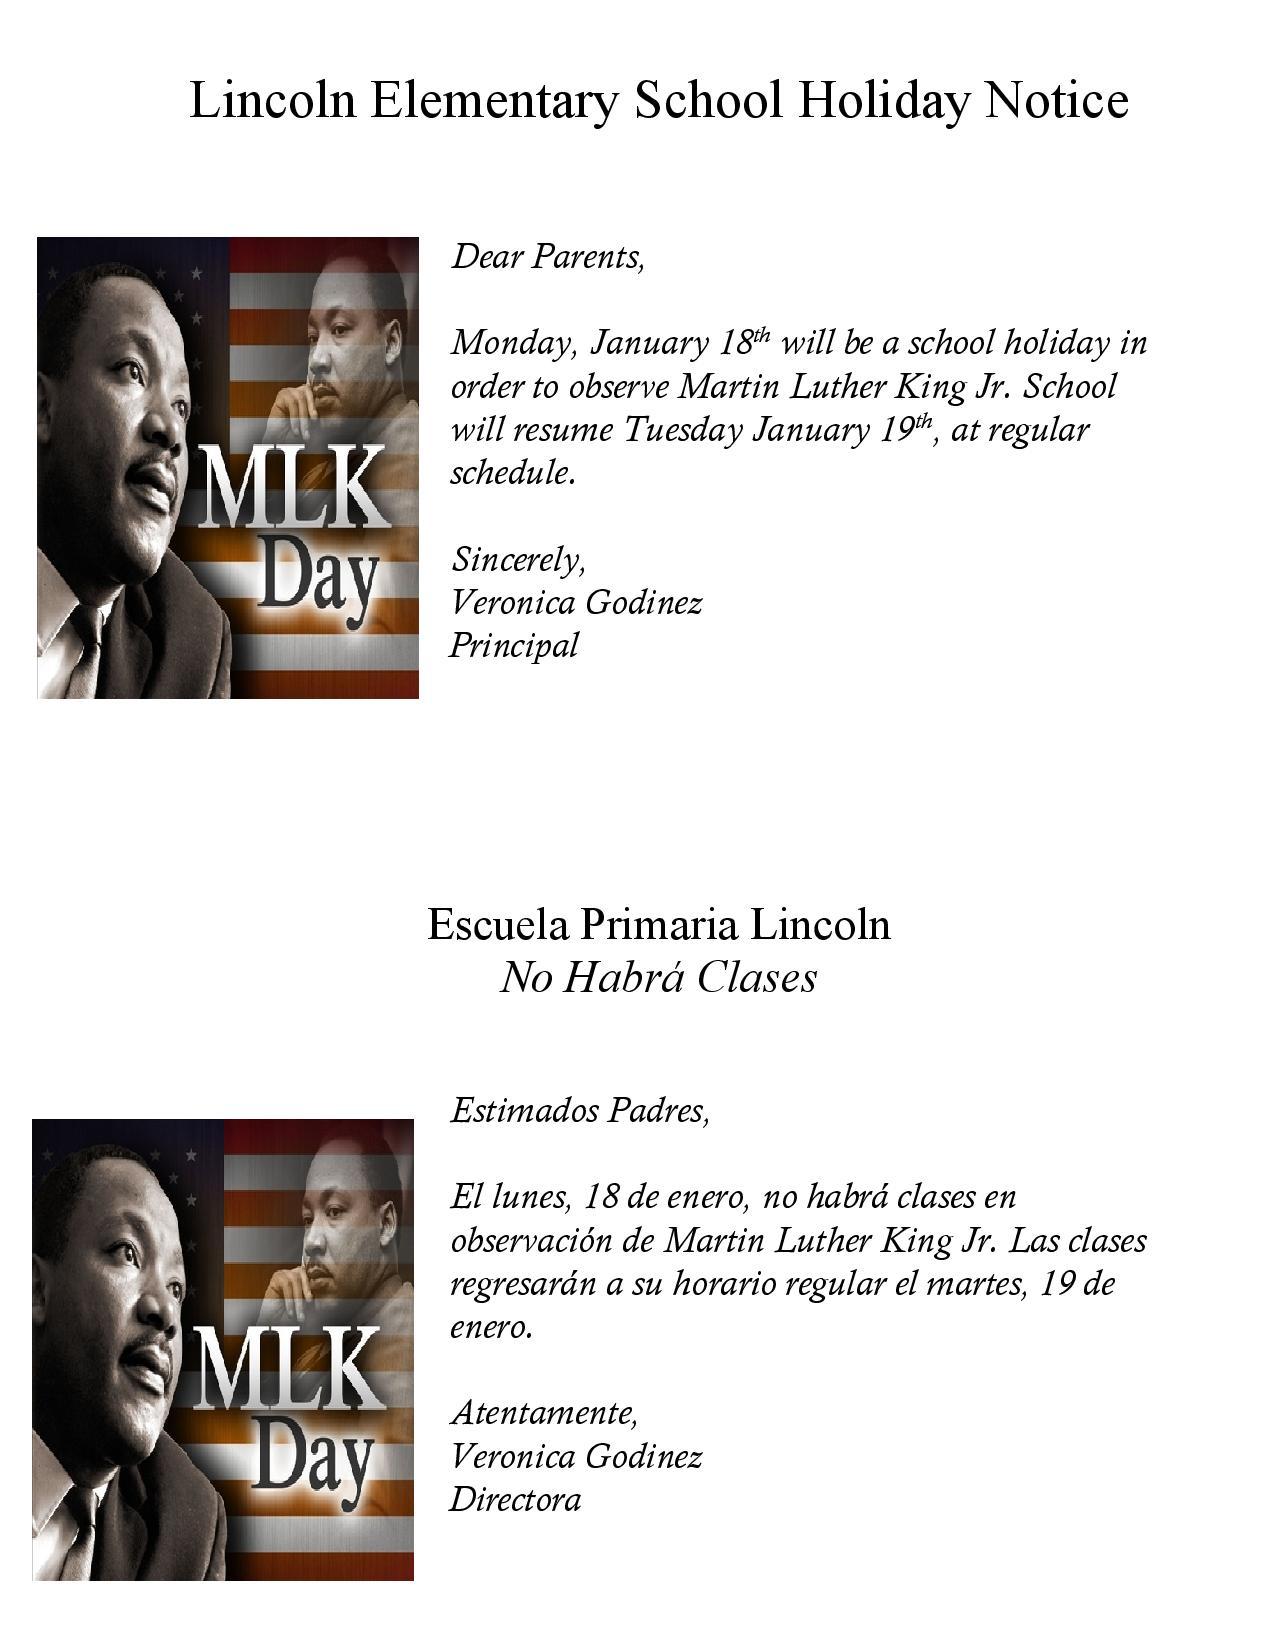 Martin Luther King Jr. Holiday Observed 